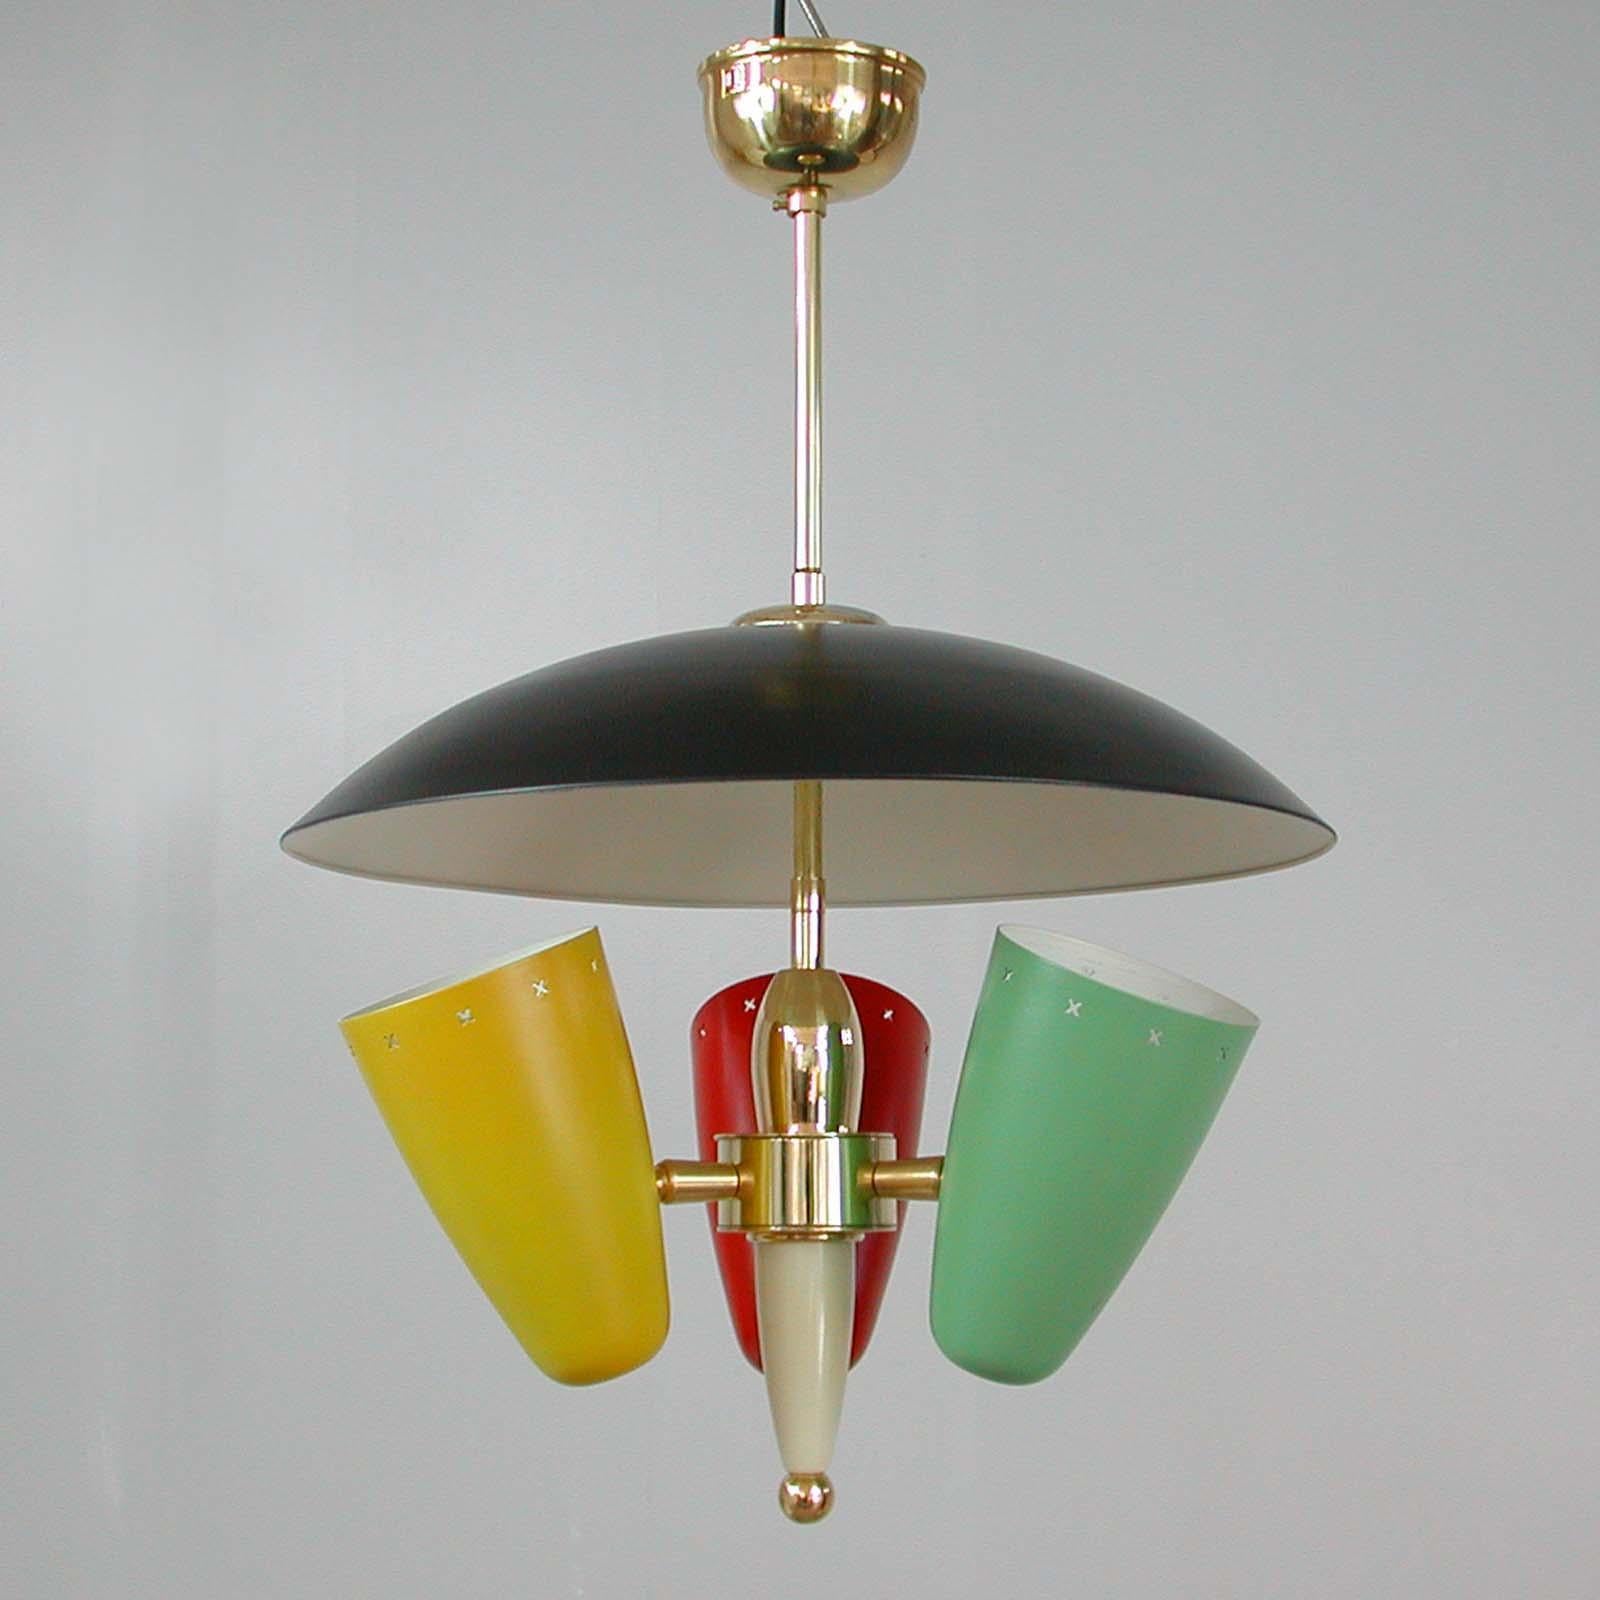 This very rare multi-color reflecting chandelier was made in Italy in the 1950s in the manner of Stilnovo.

The chandelier has got three lacquered metal shades and requires one E14 bulb per shade. The colors are red, yellow and mint. The top